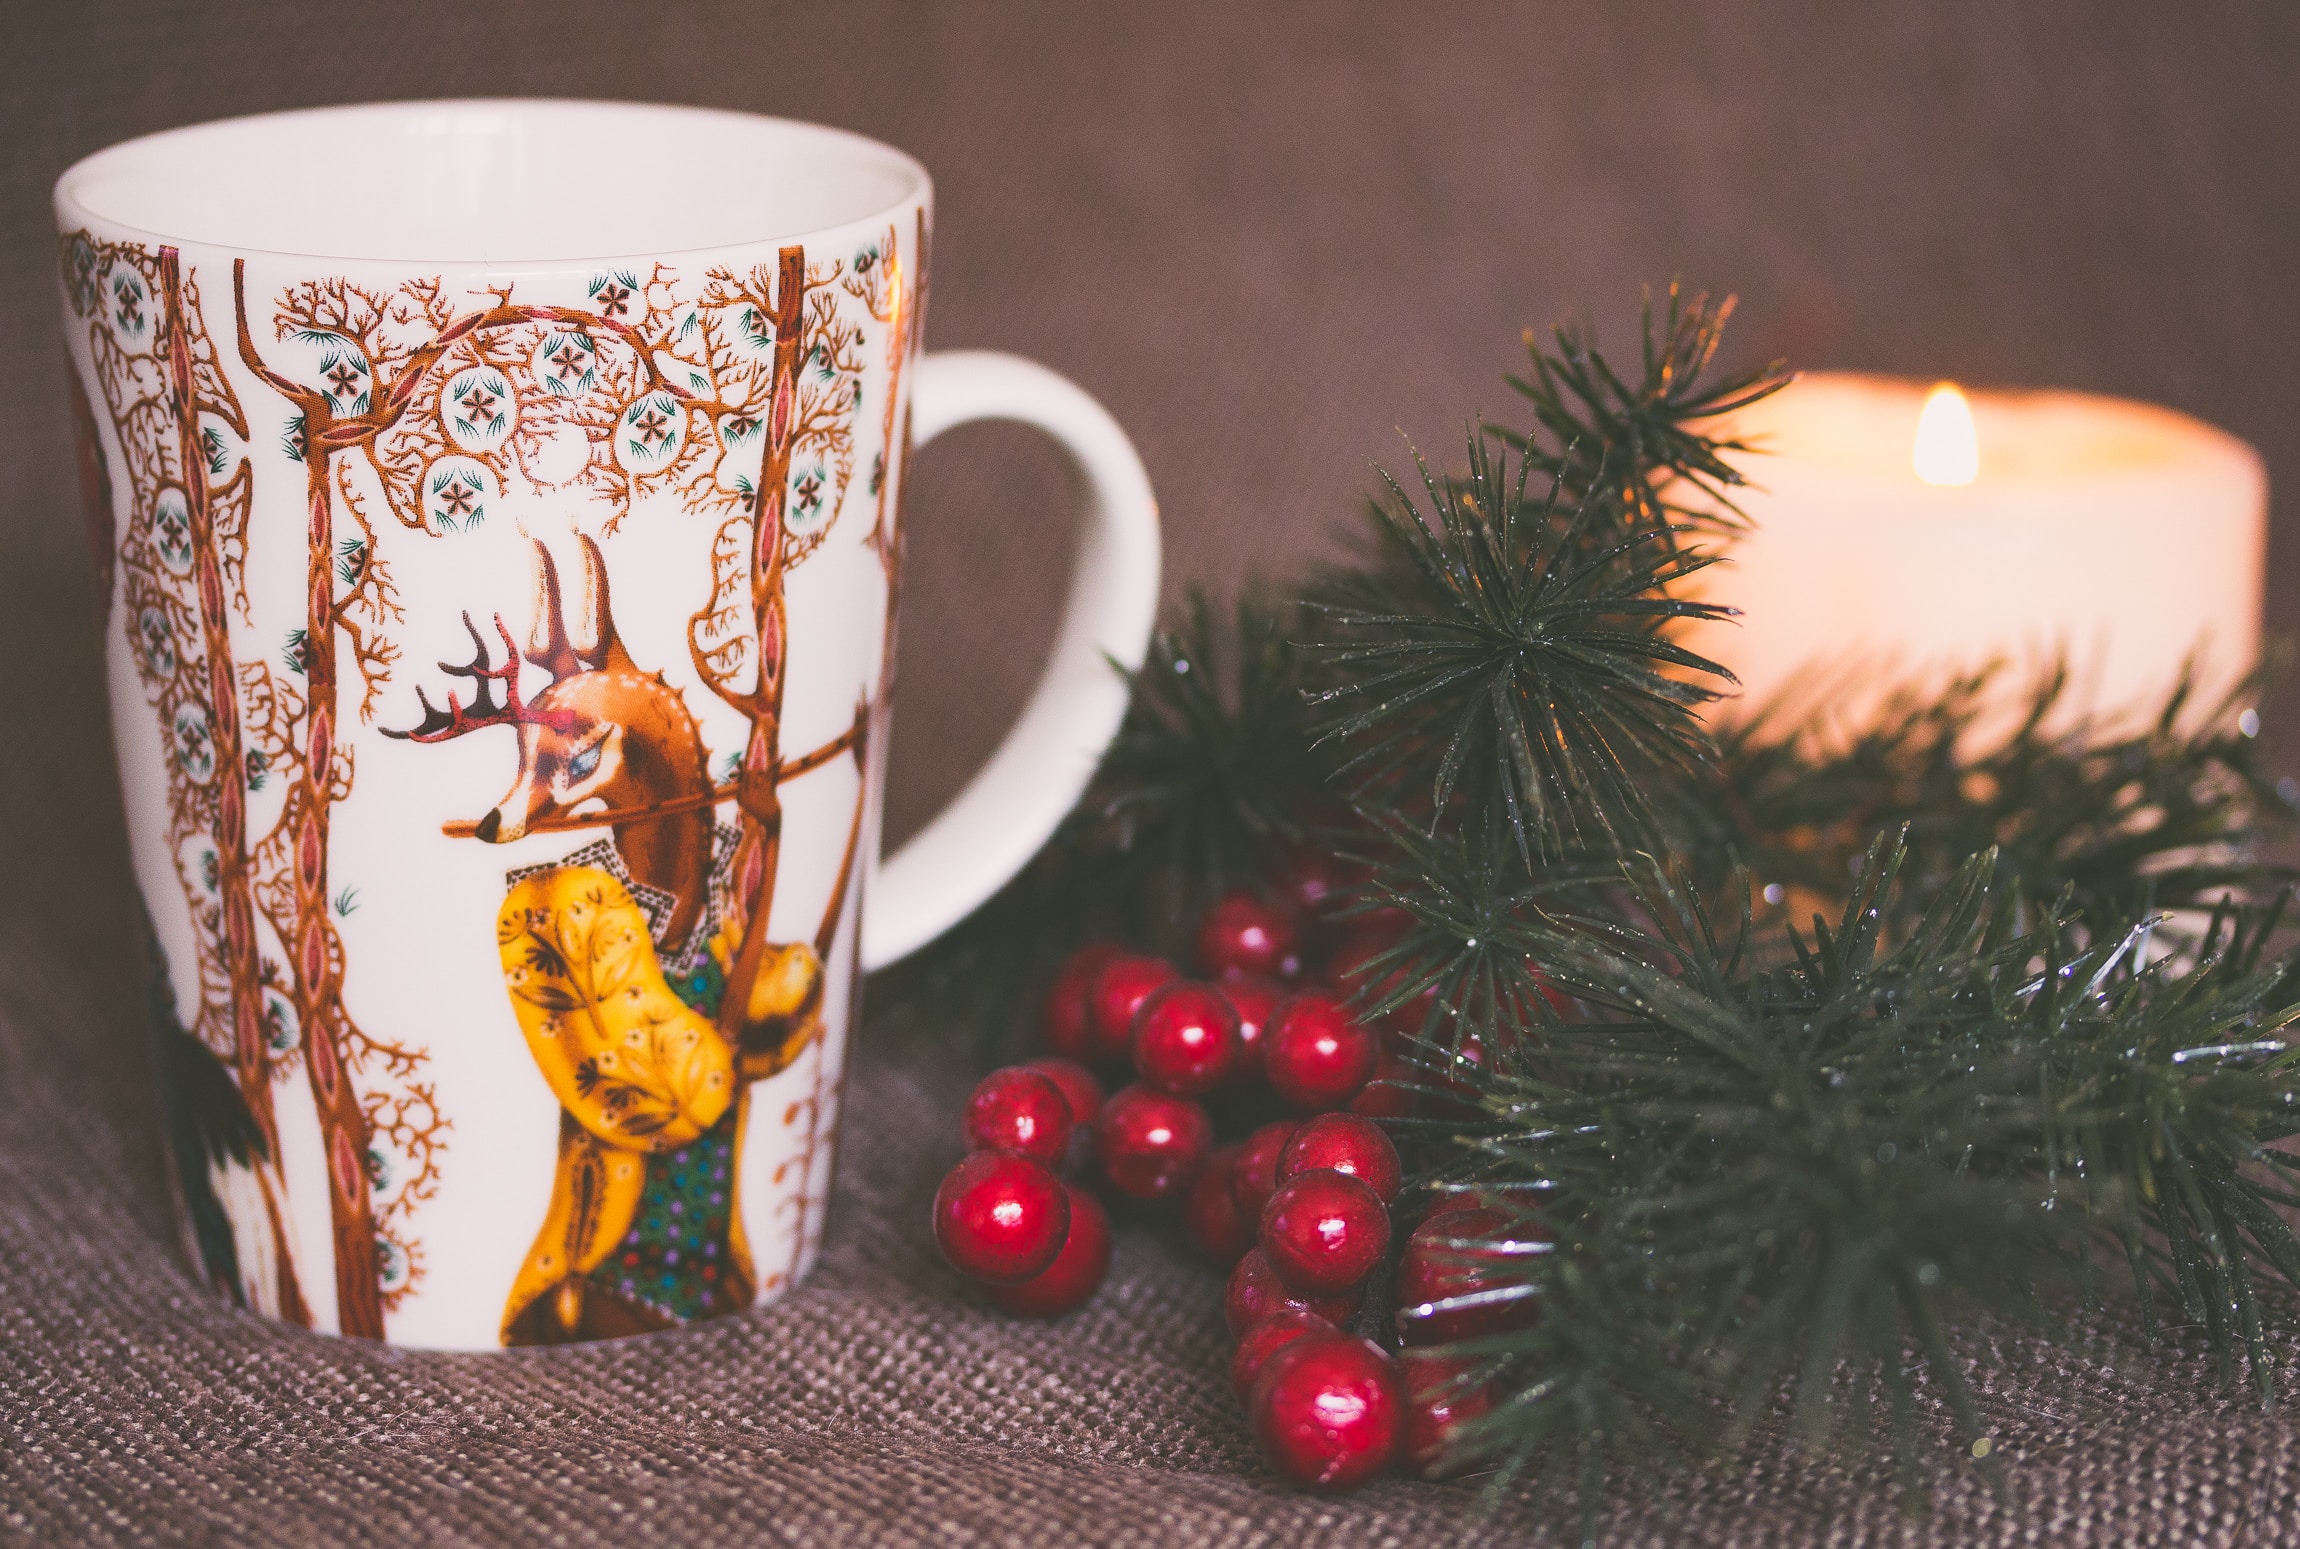 wallpaper White and brown print ceramic mug near red mistletoe and candle